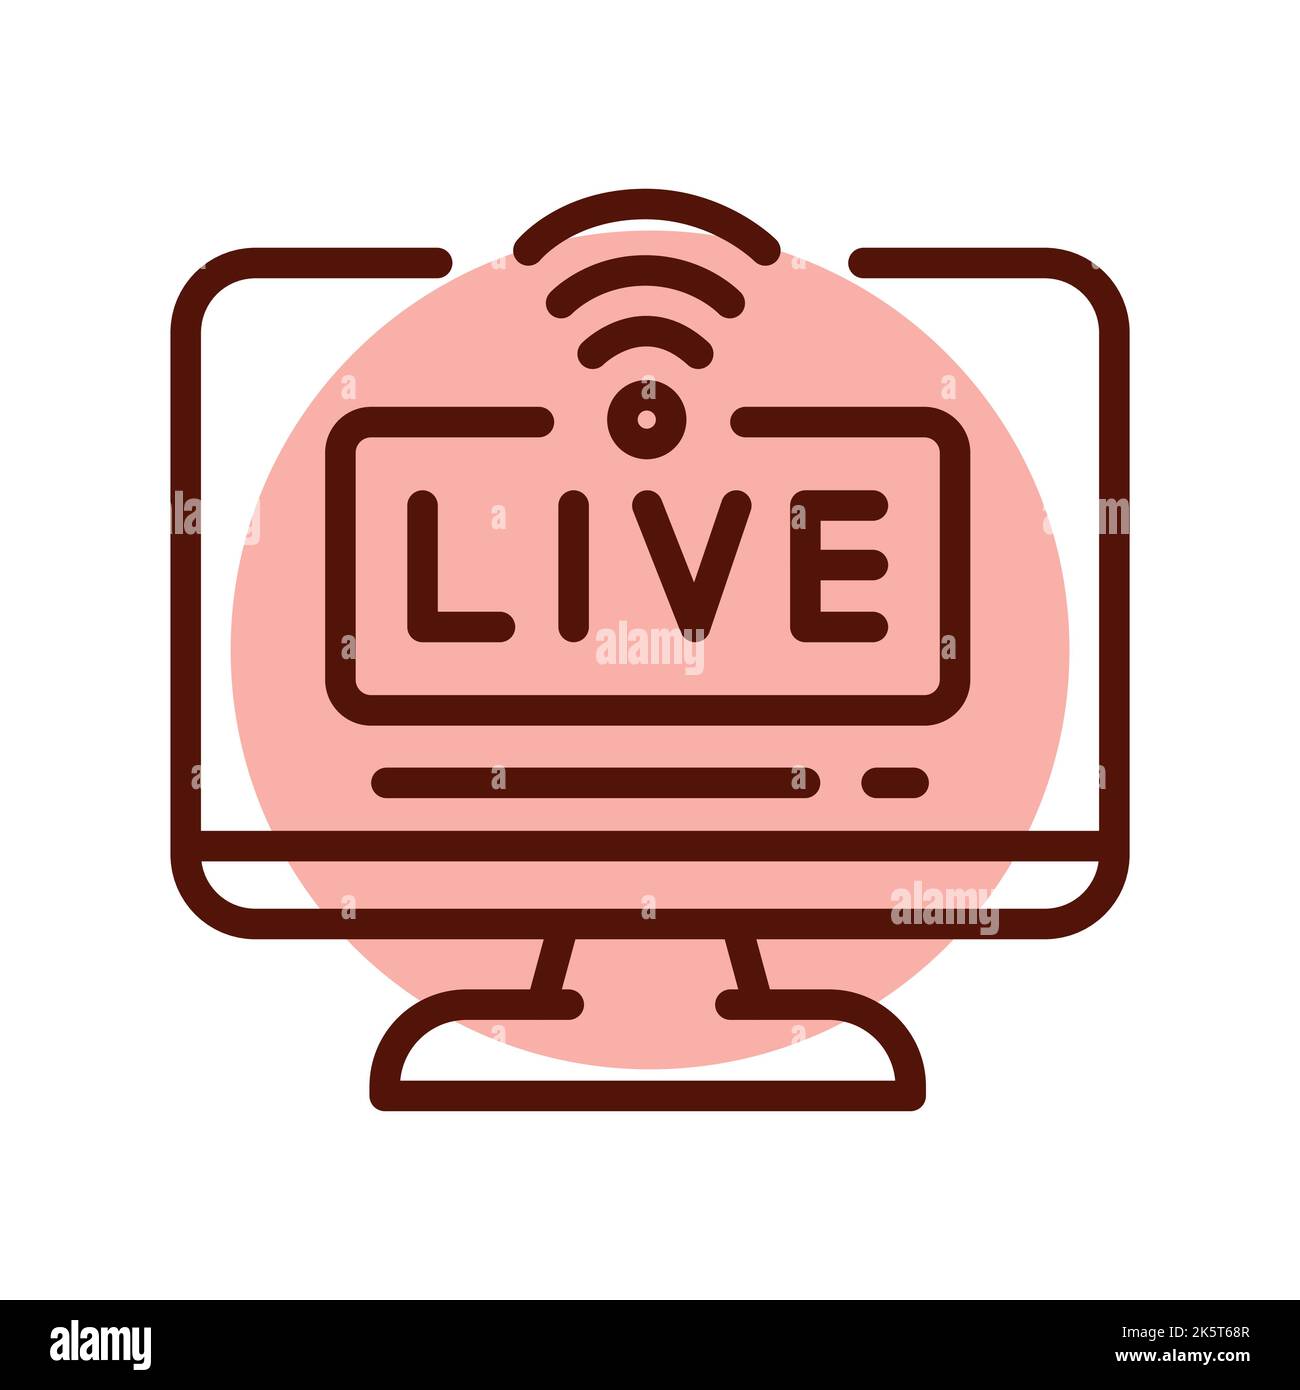 Live streaming line icon. Online promotion Stock Vector